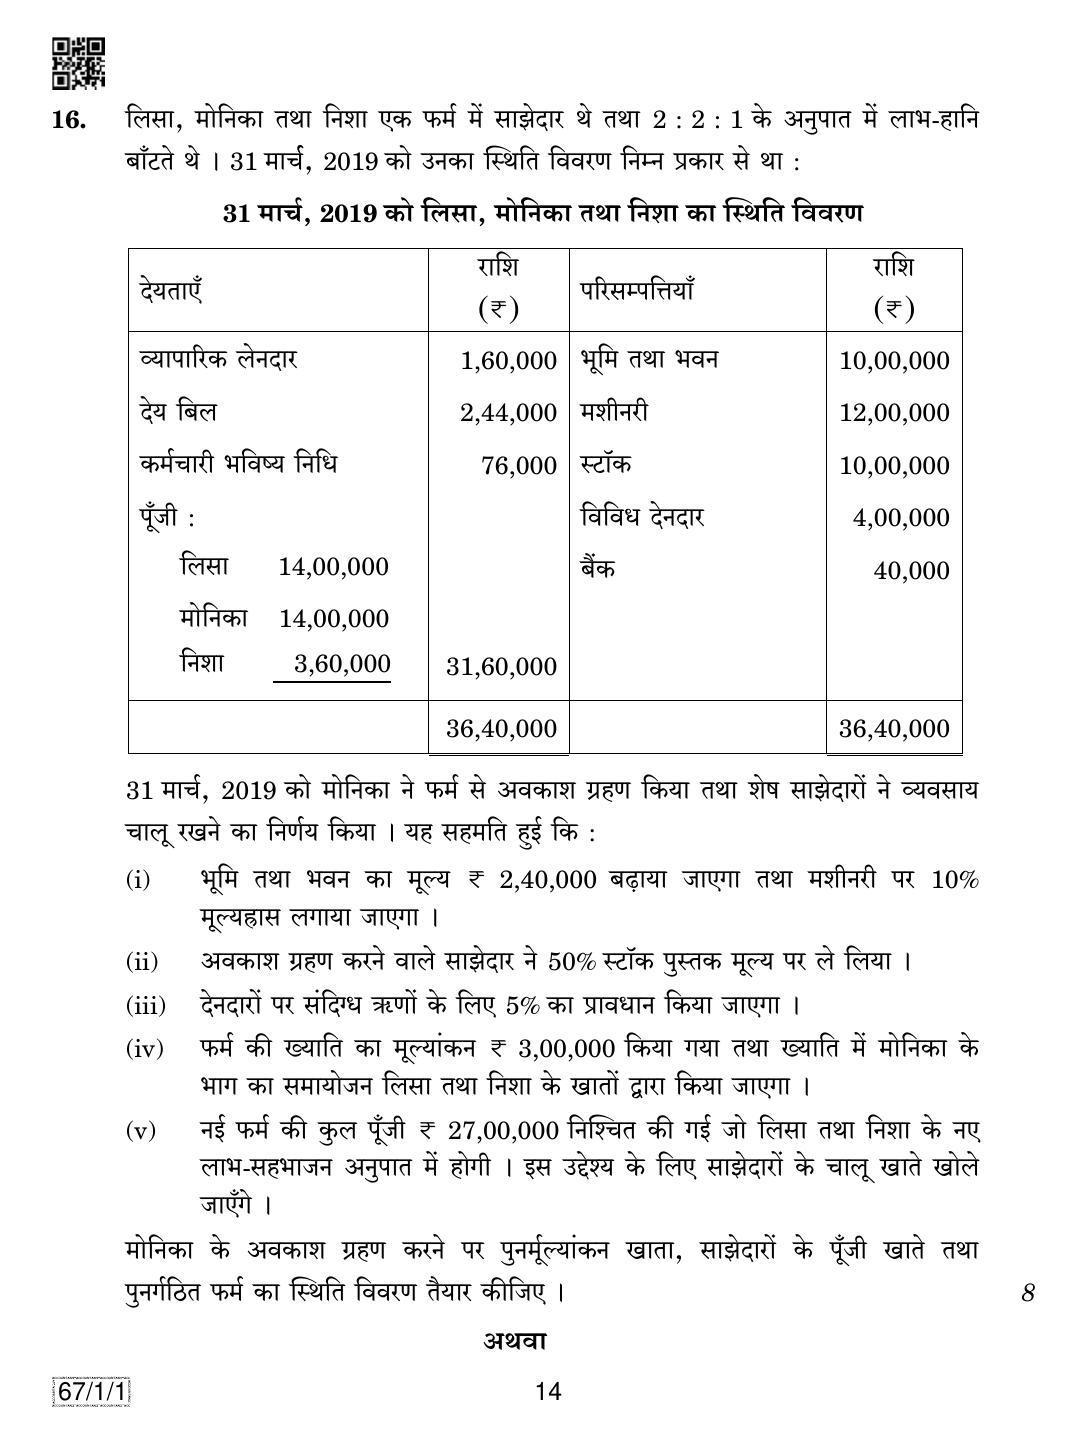 CBSE Class 12 67-1-1 ACCOUNTANCY 2019 Compartment Question Paper - Page 14